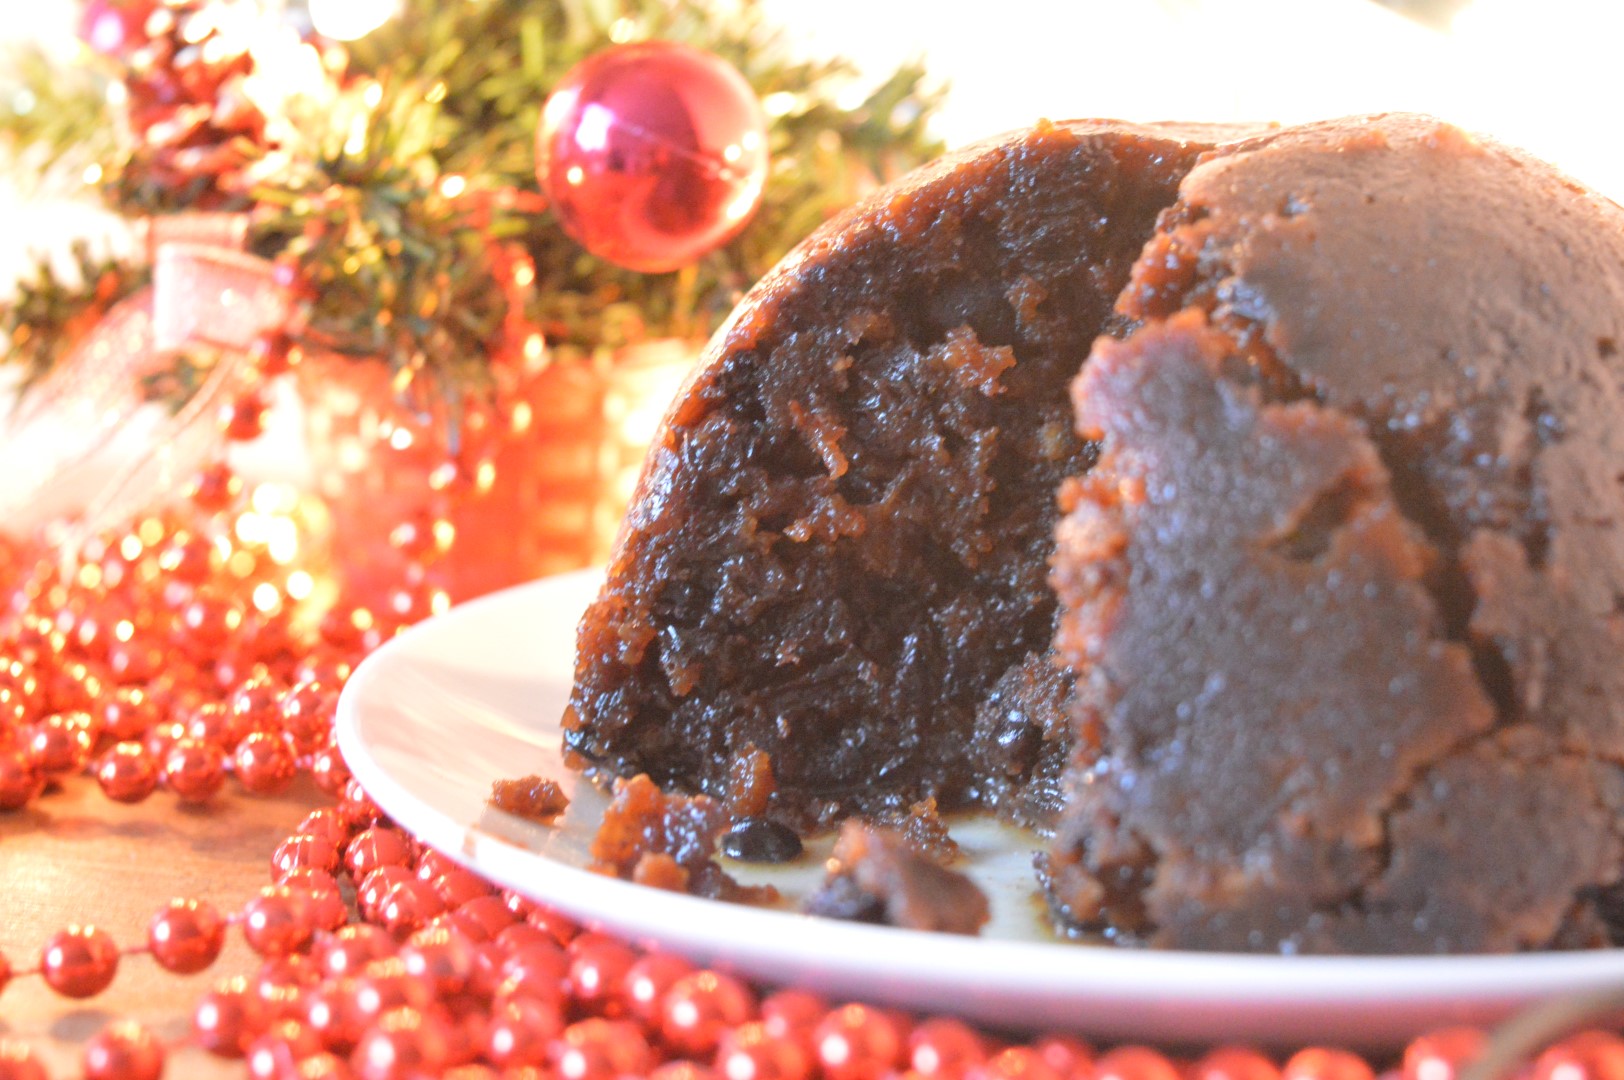 christmaspudding - vegan, gluten-free and nut-free! This christmas is perfect for anyone looking for a free from and allergy safe version! www.intolerantgourmand.com